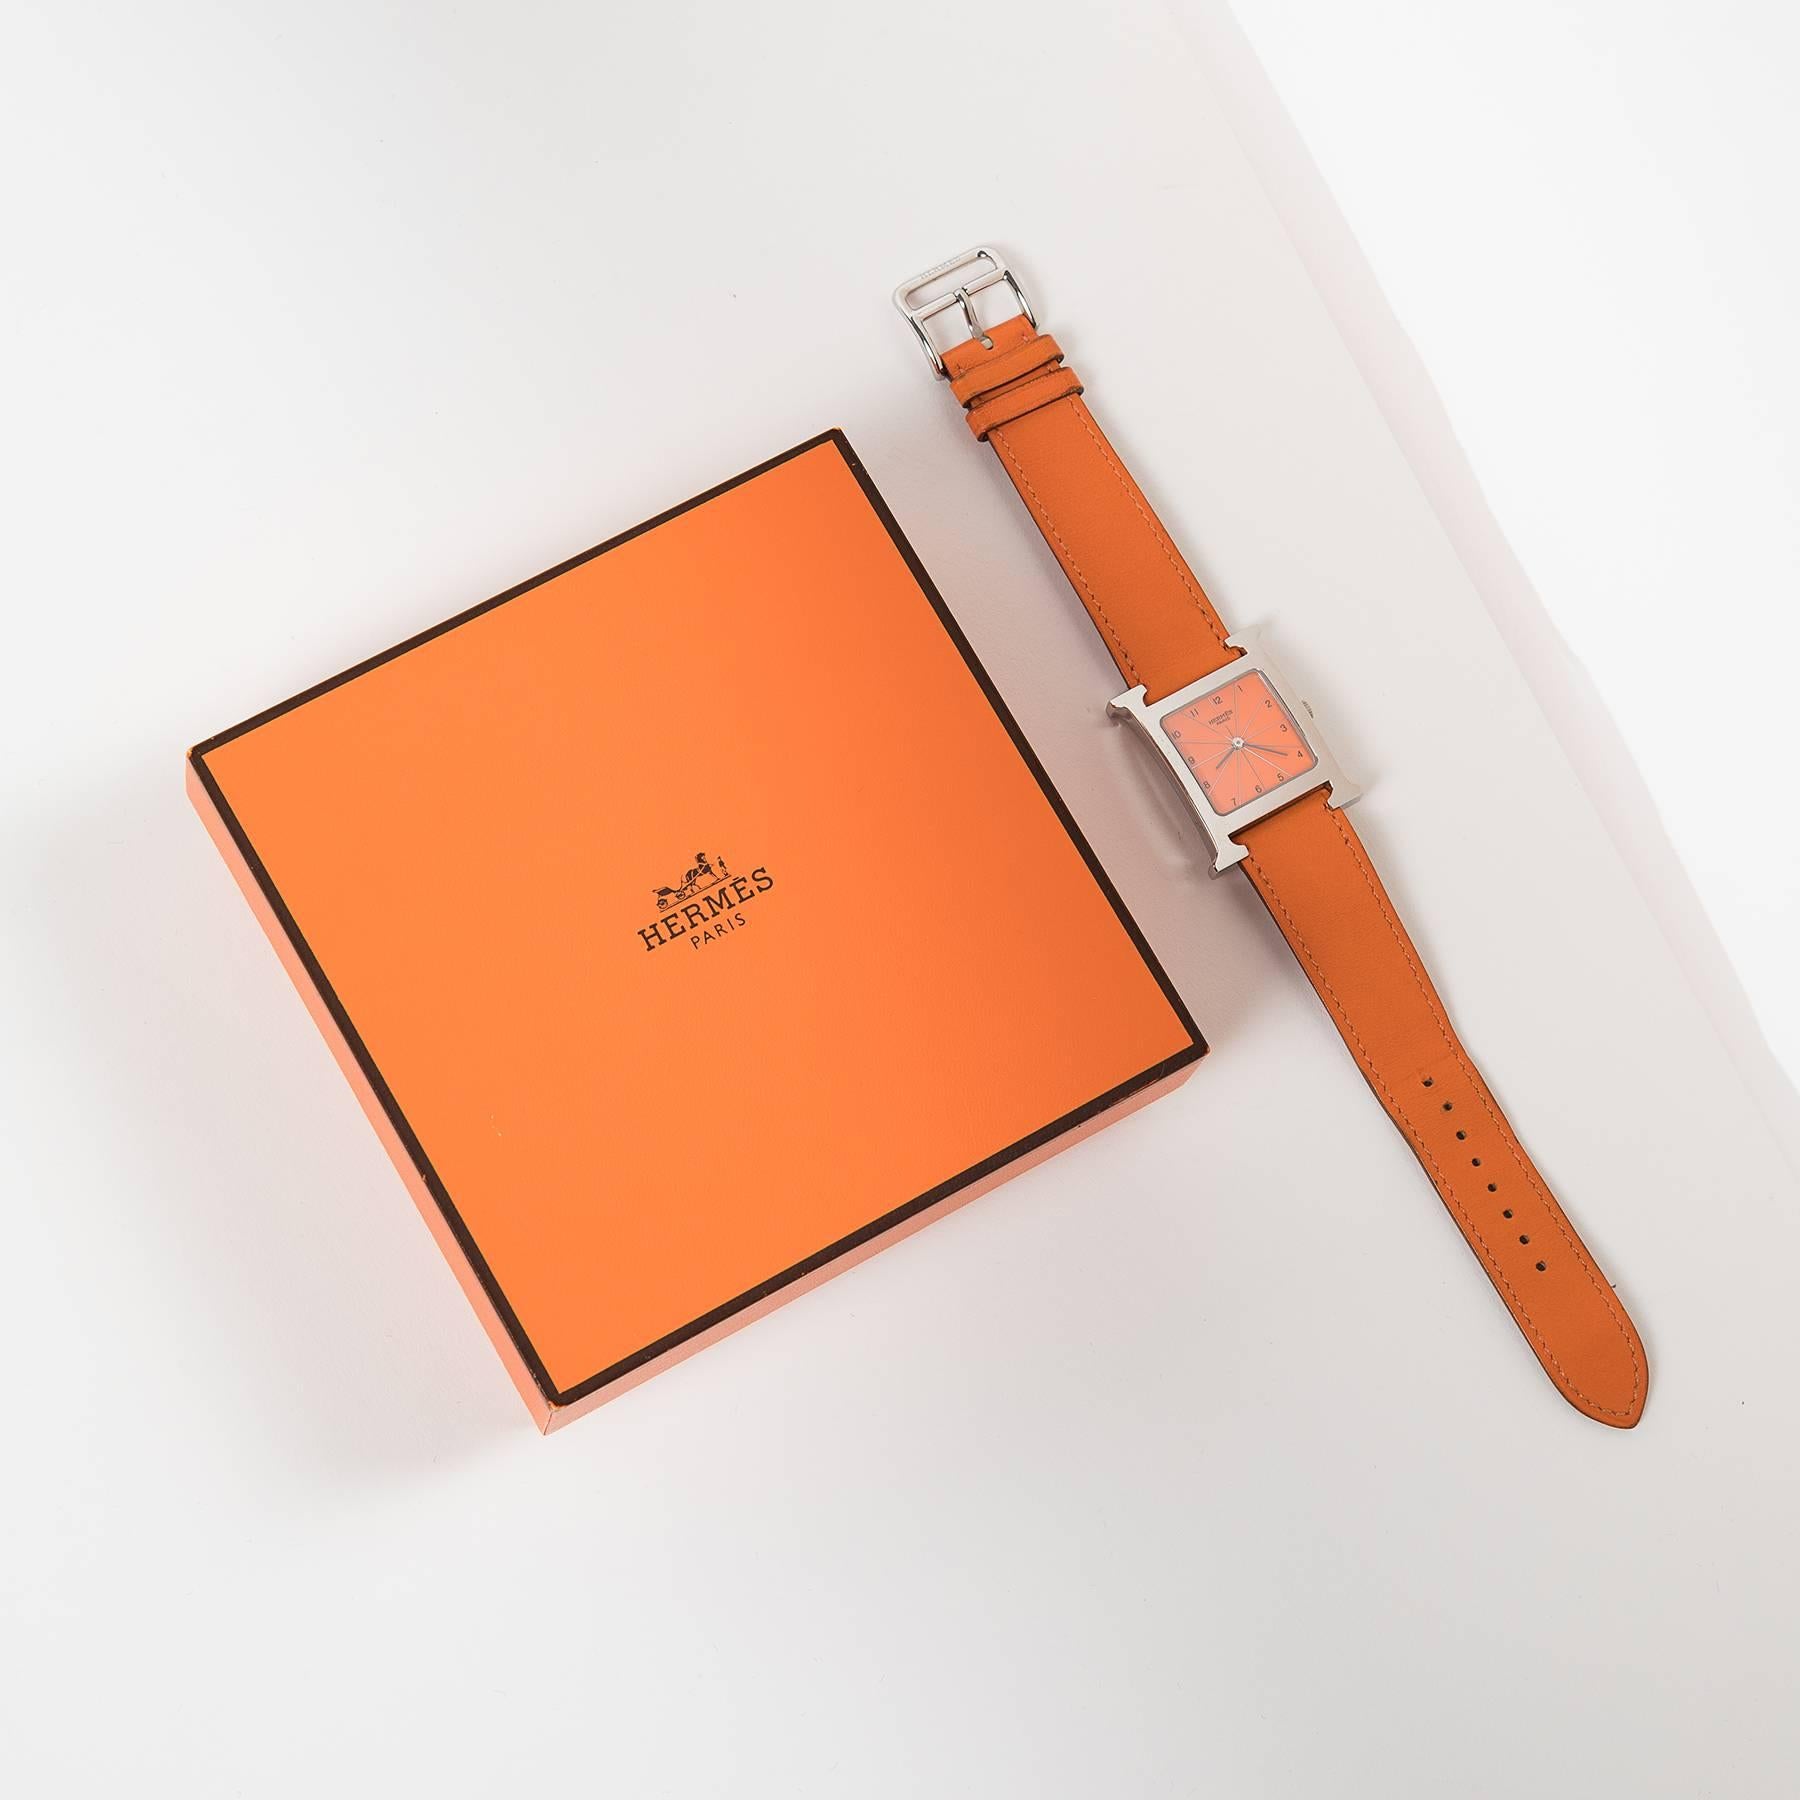 Hermes Heure H wrist watch.
Very good condition. Only light signs of wear. 
With original box and certificate.
Tangerine swift Wristband.
made in france.